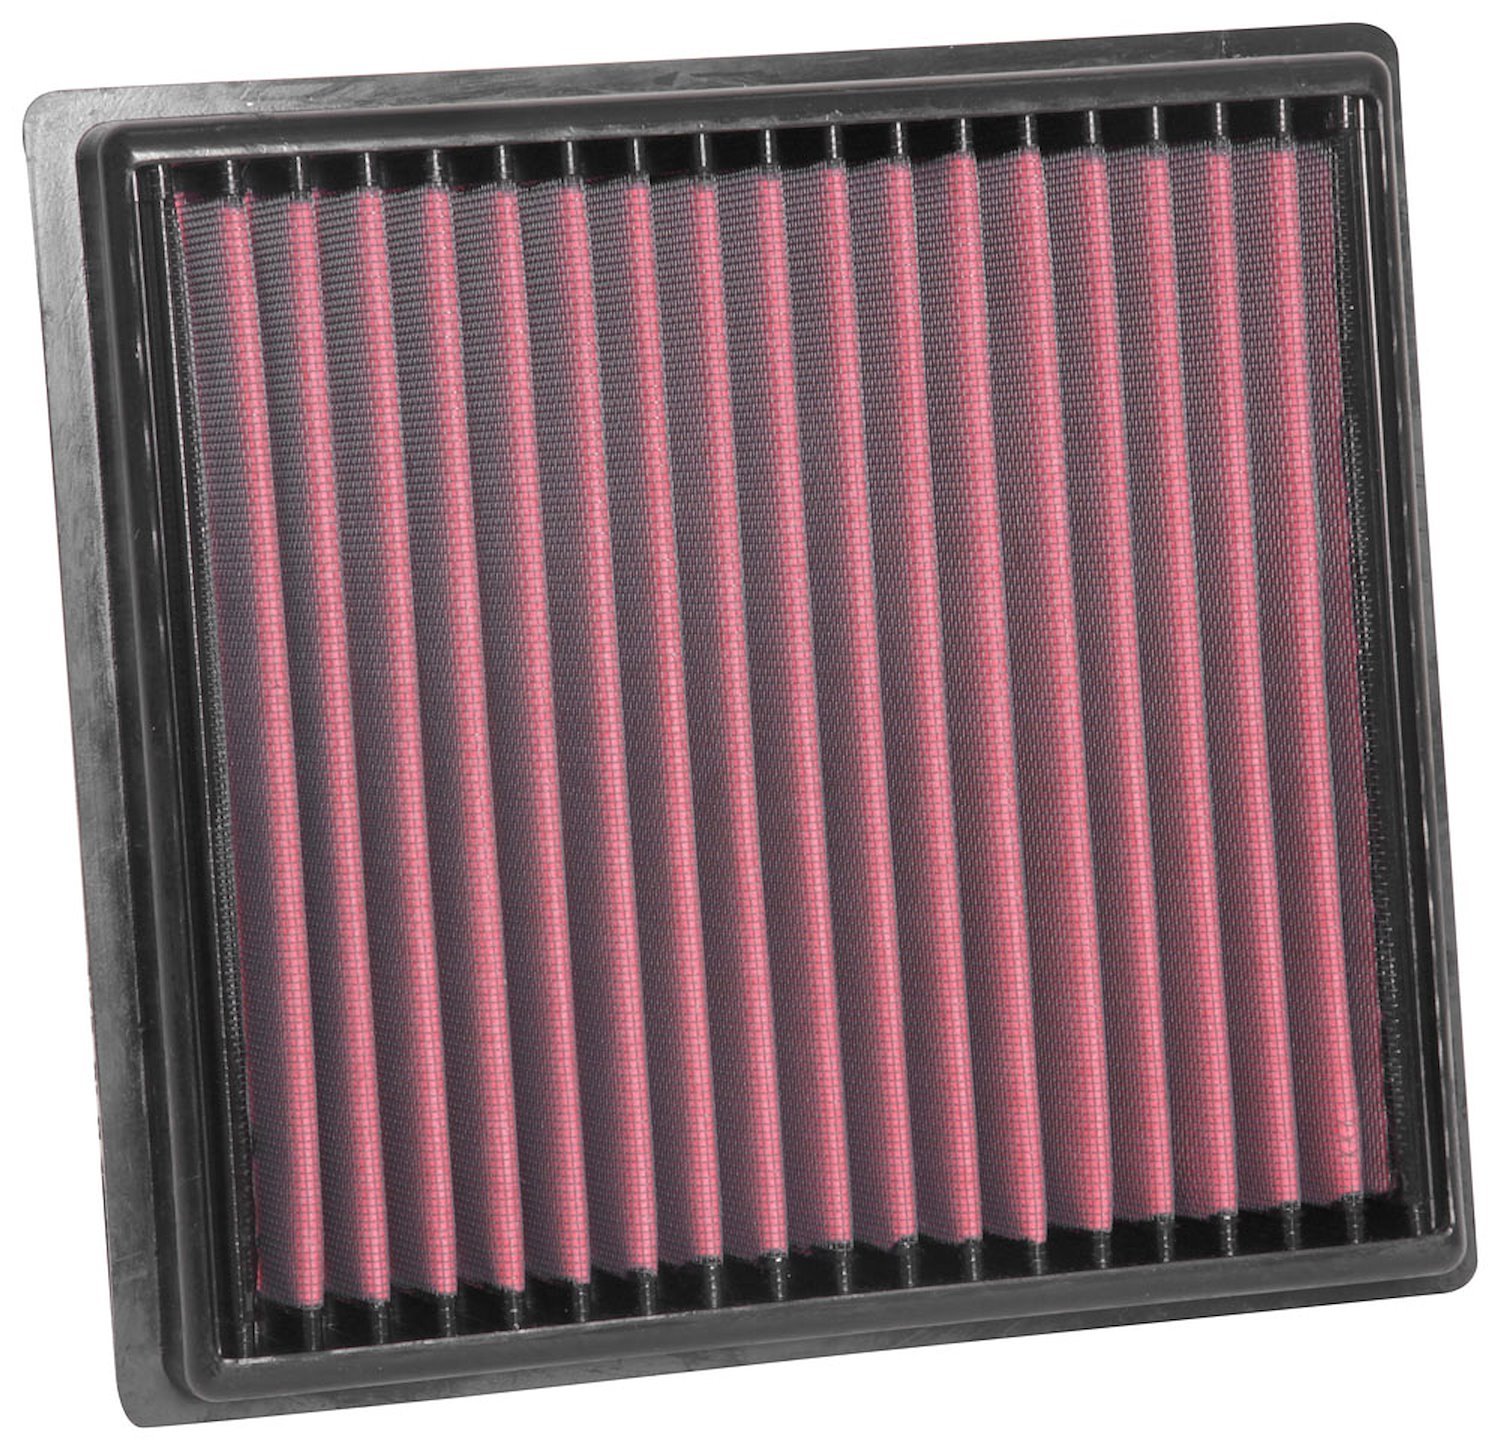 SynthaMax "Dry" OE Replacement Air Filter 2015-Up Chevy Colorado/GMC Canyon 2.5L, 3.6L